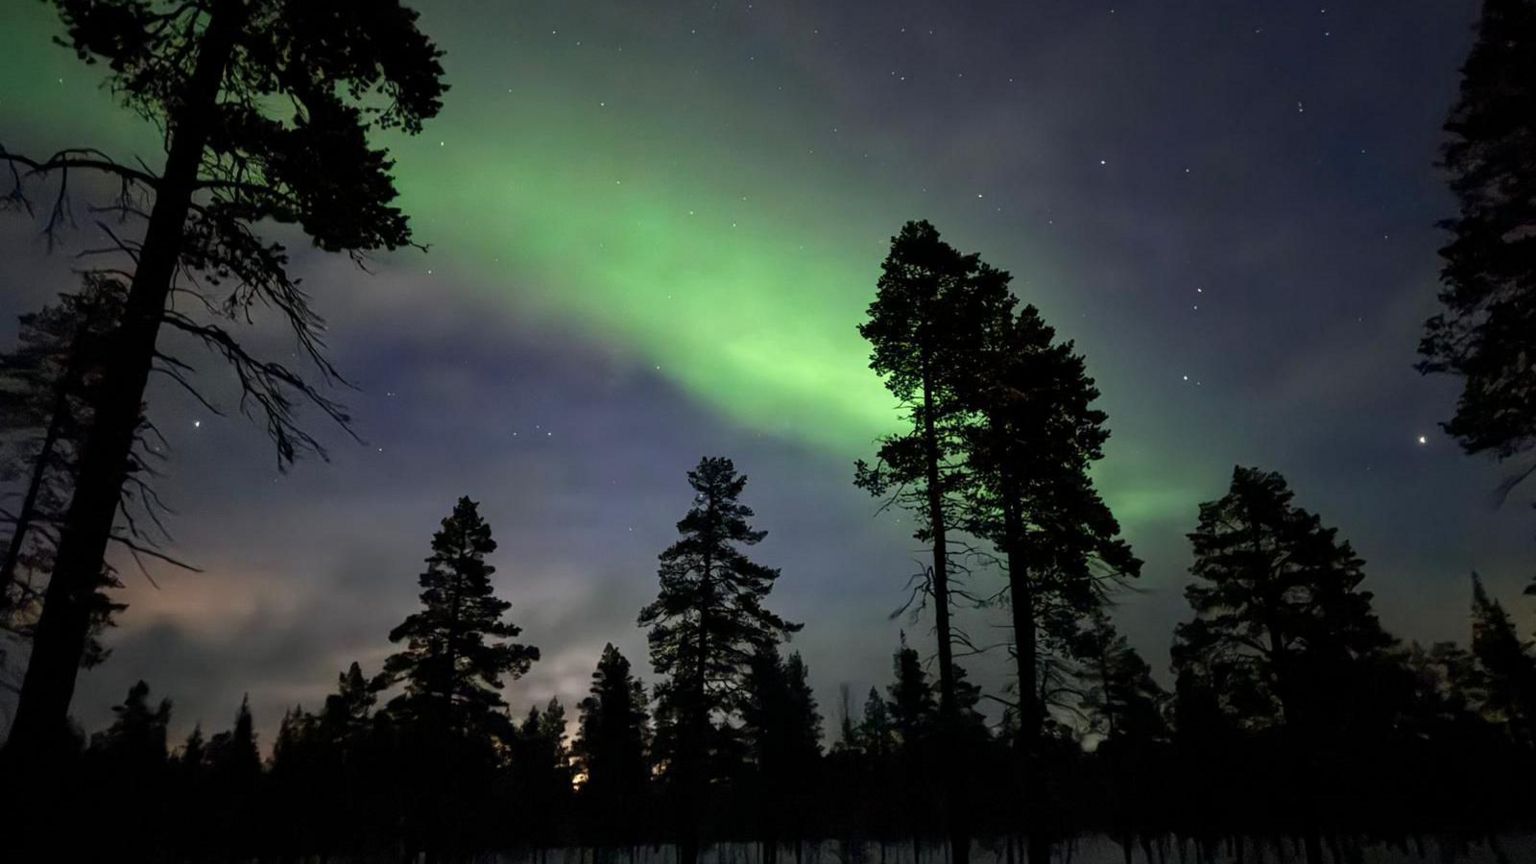 Blue and green streaks of the Northern Lights visible in the night sky above a forest